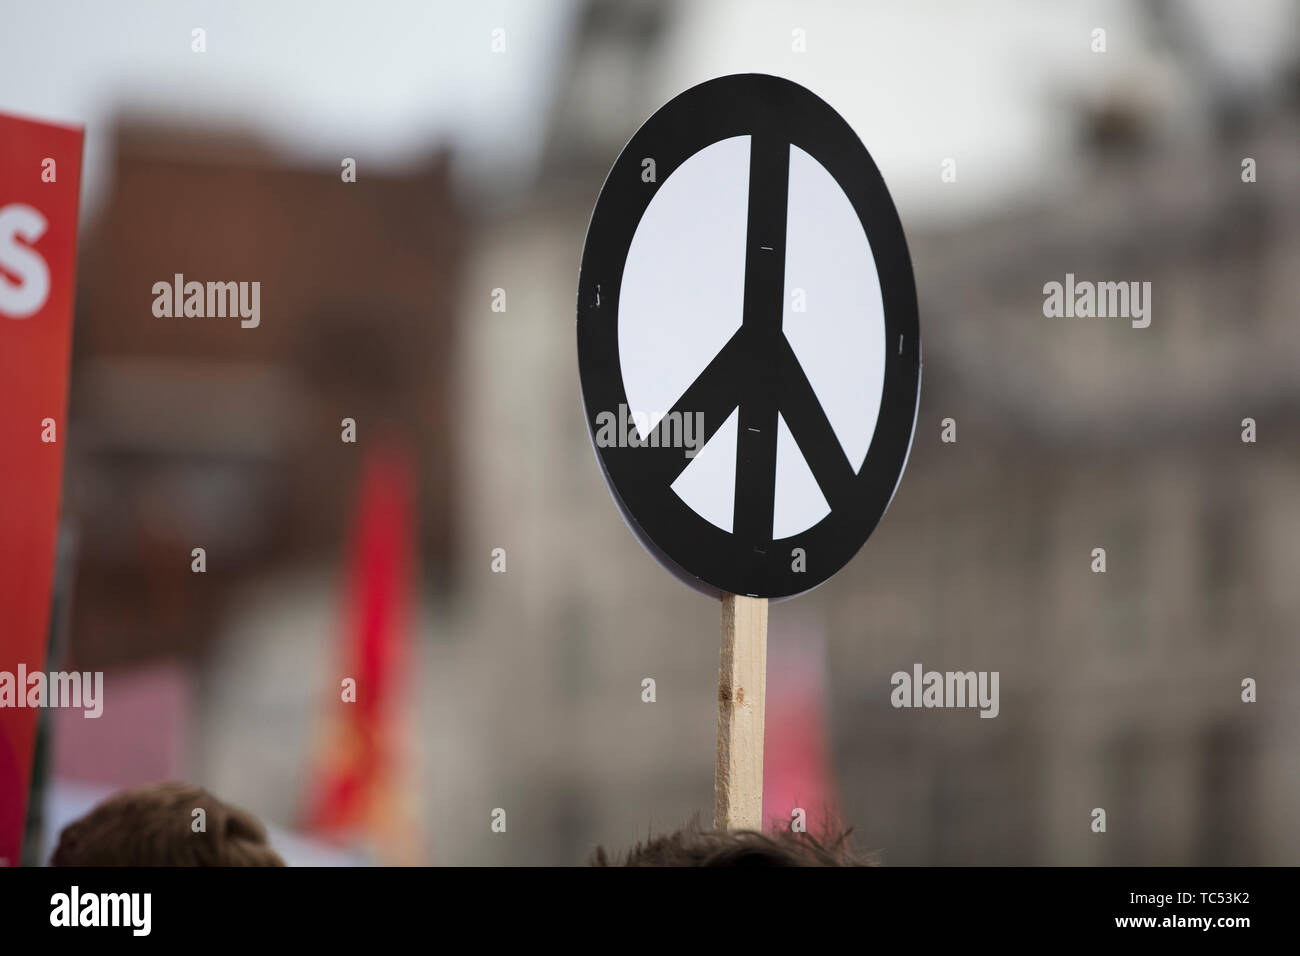 A person holds a peace sign banner at a protest Stock Photo